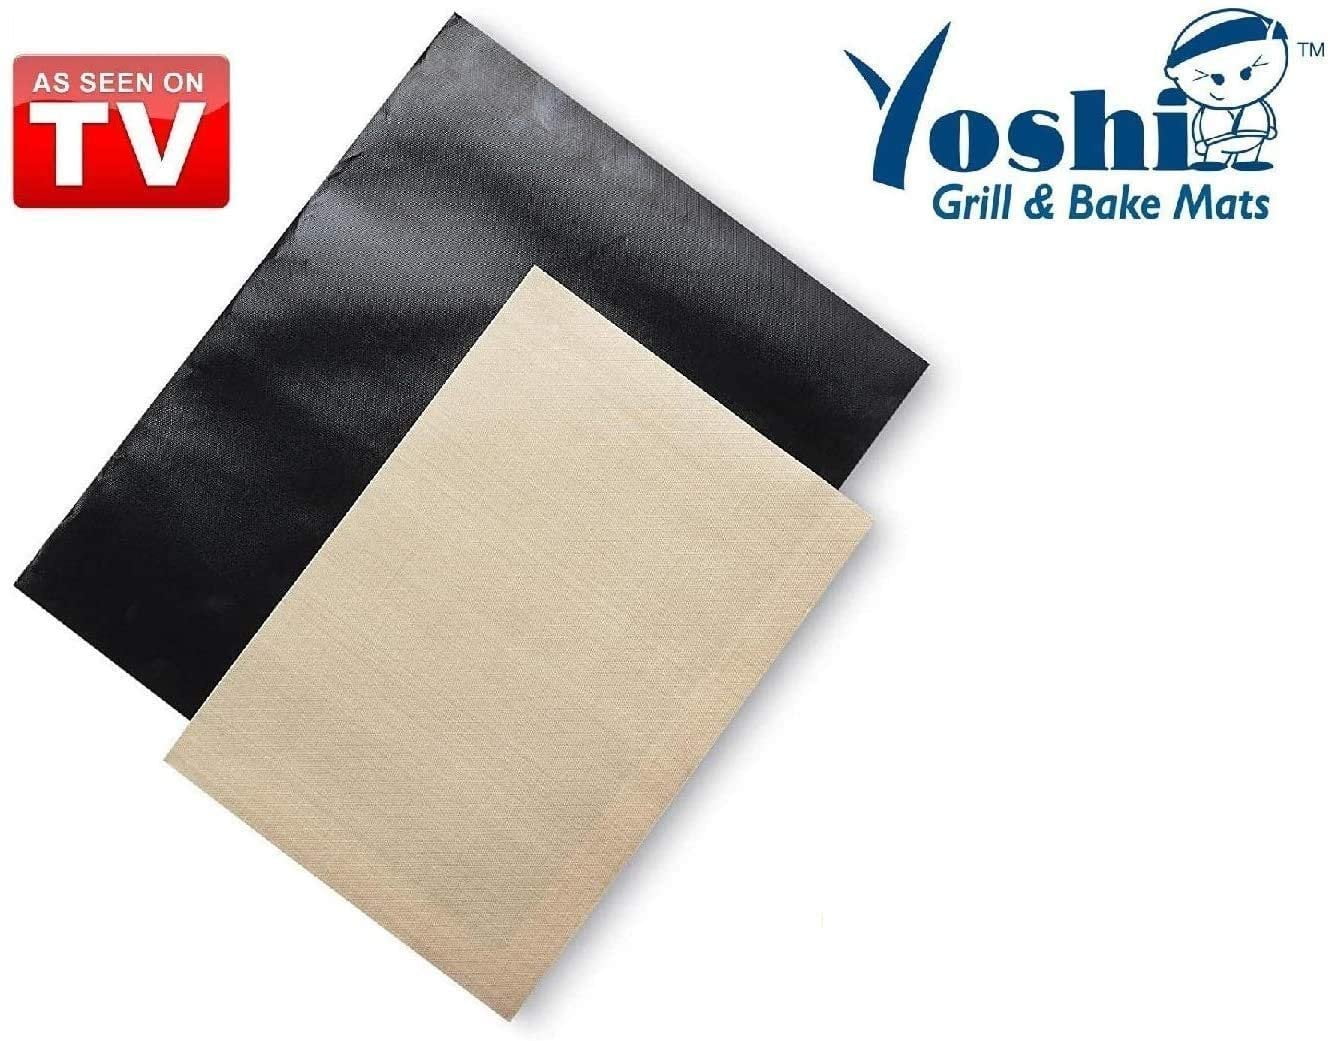 rotary serve Strong wind as seen on tv yoshi grill & bake mat, 3 pack | two (2) black grill mats  15.75" x 13" and one (1) beige 13.25" x 9.25" - Walmart.com